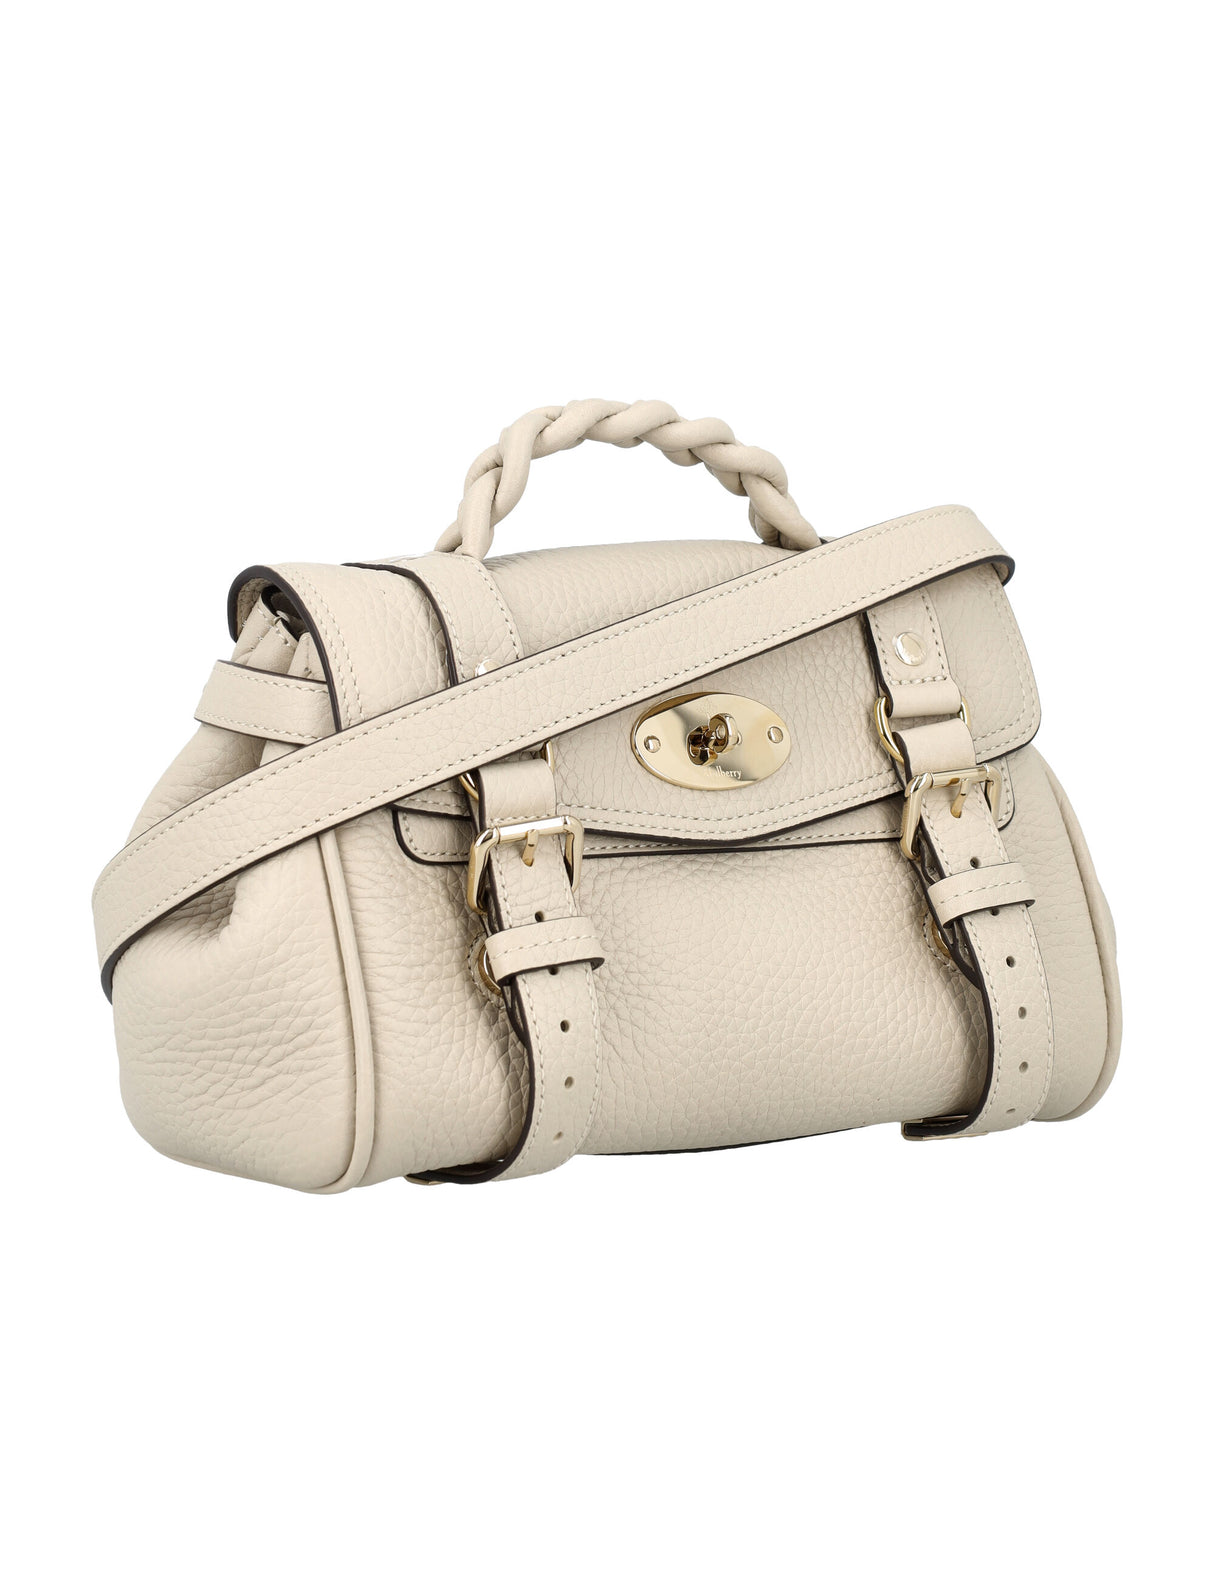 MULBERRY Chalk White Mini Alexa Leather Shoulder Bag with Braided Handle and Postman's Lock Closure